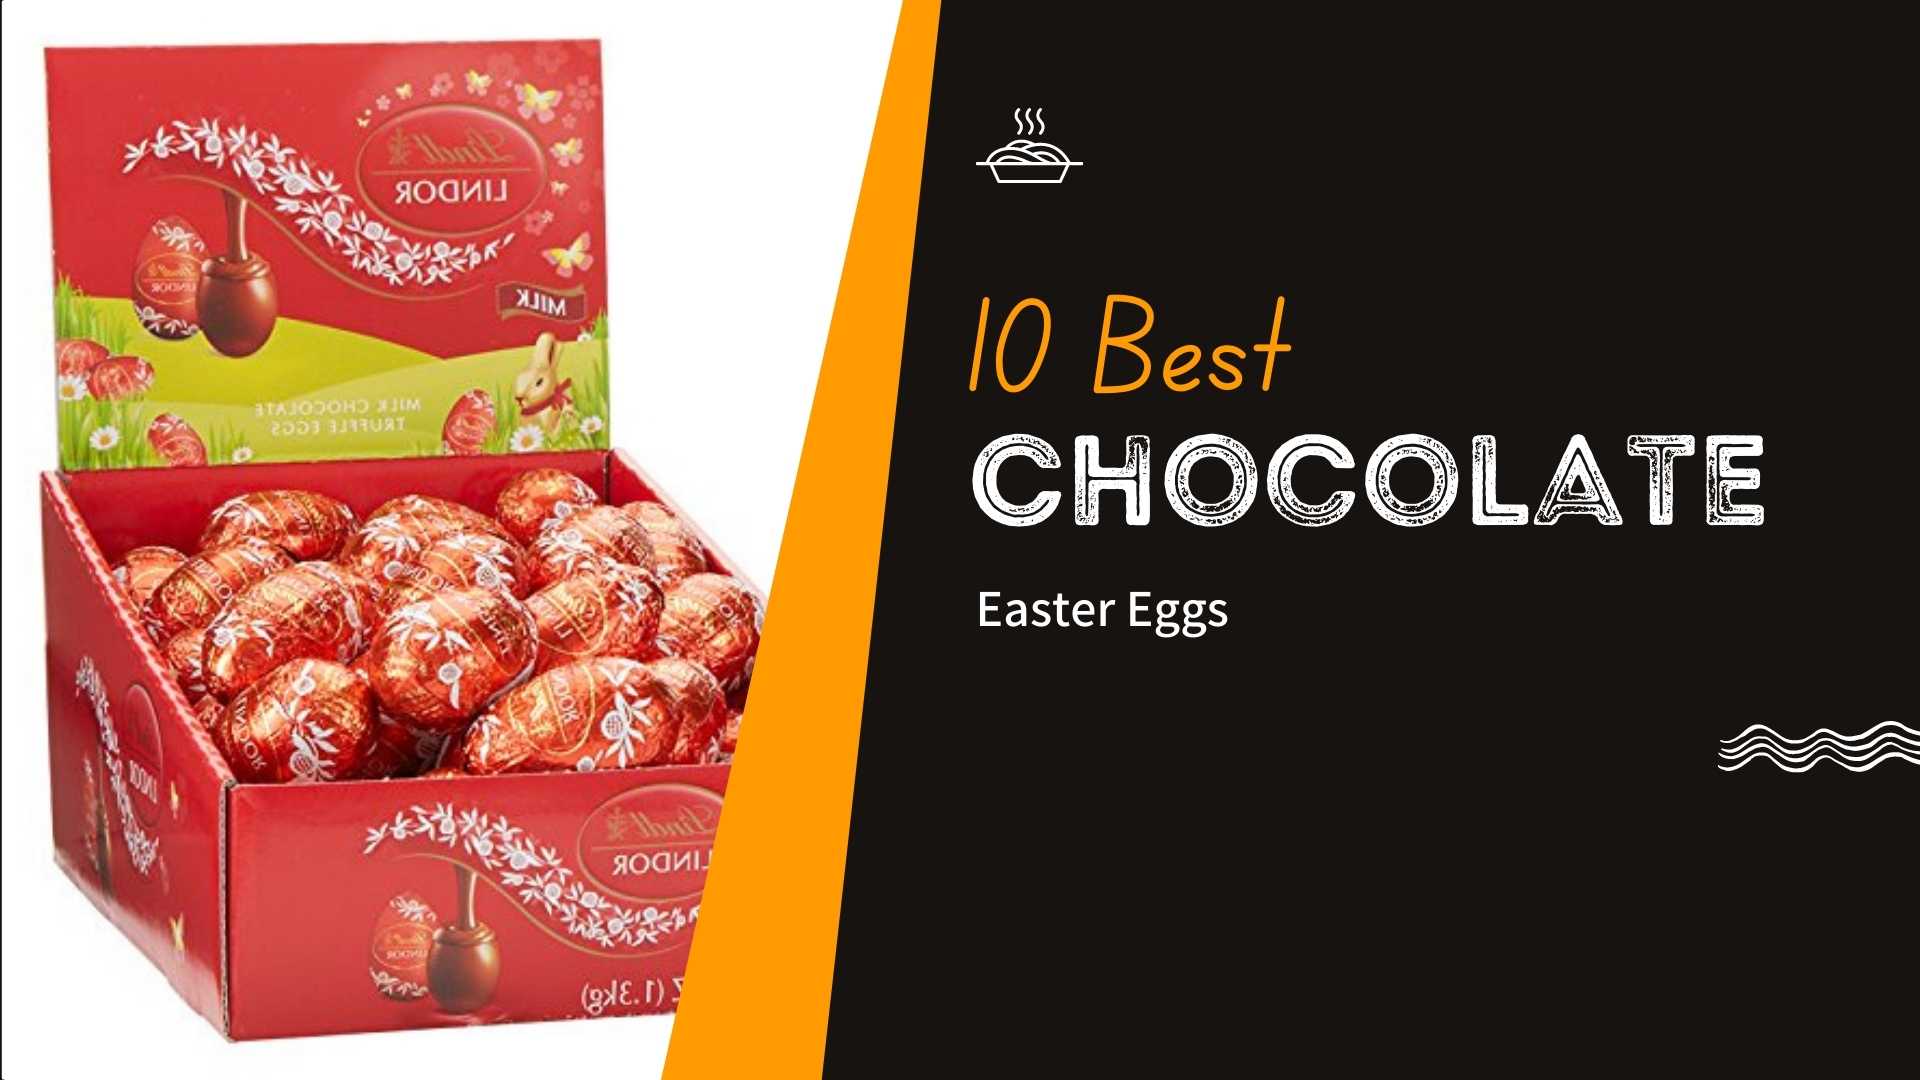 10 Best Chocolate Easter Eggs